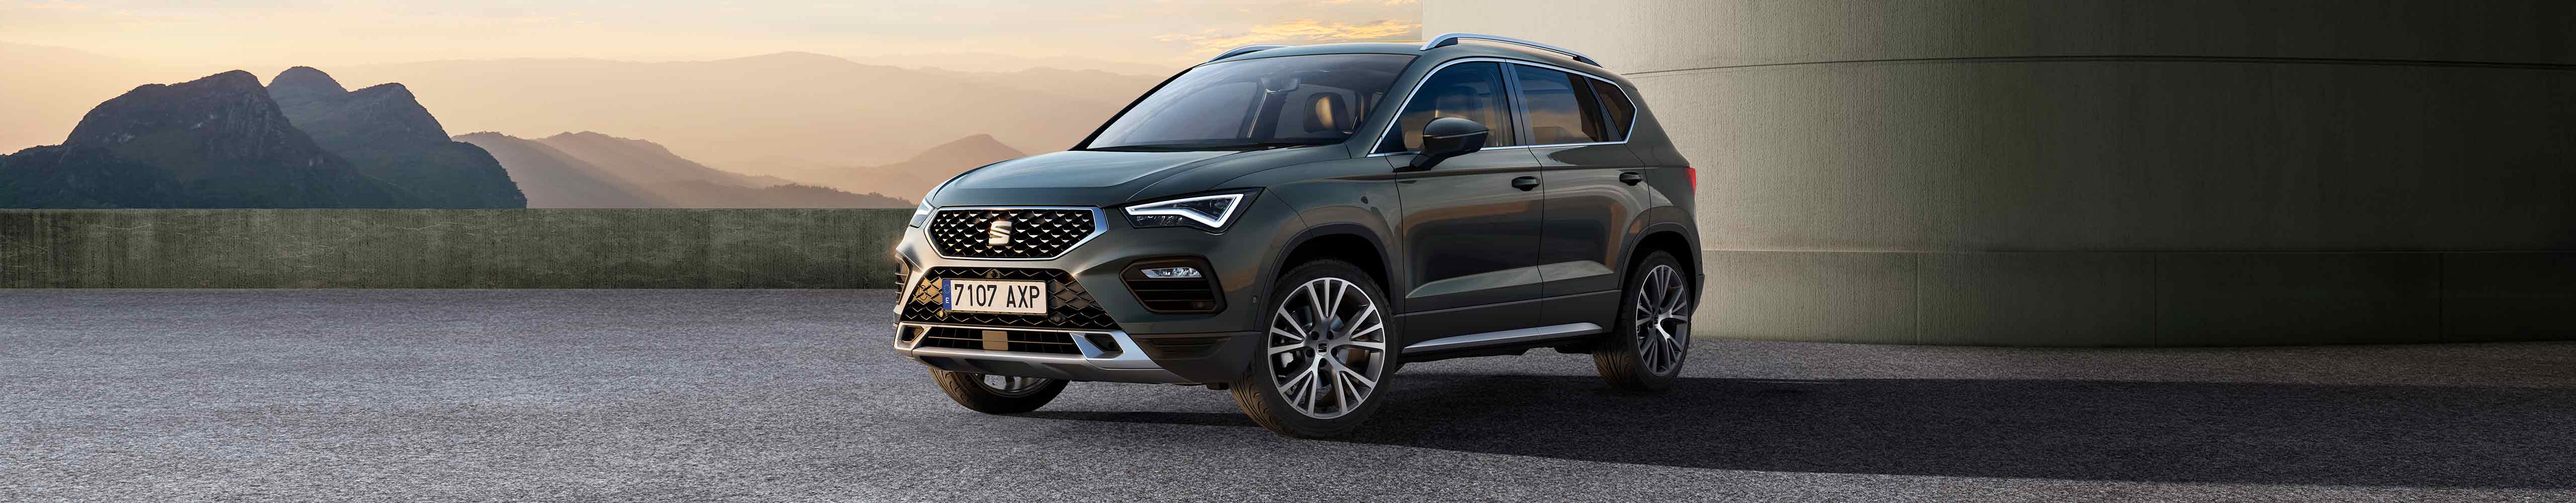 New SEAT Ateca in dark camouflage exterior front side view with reflex silver elements